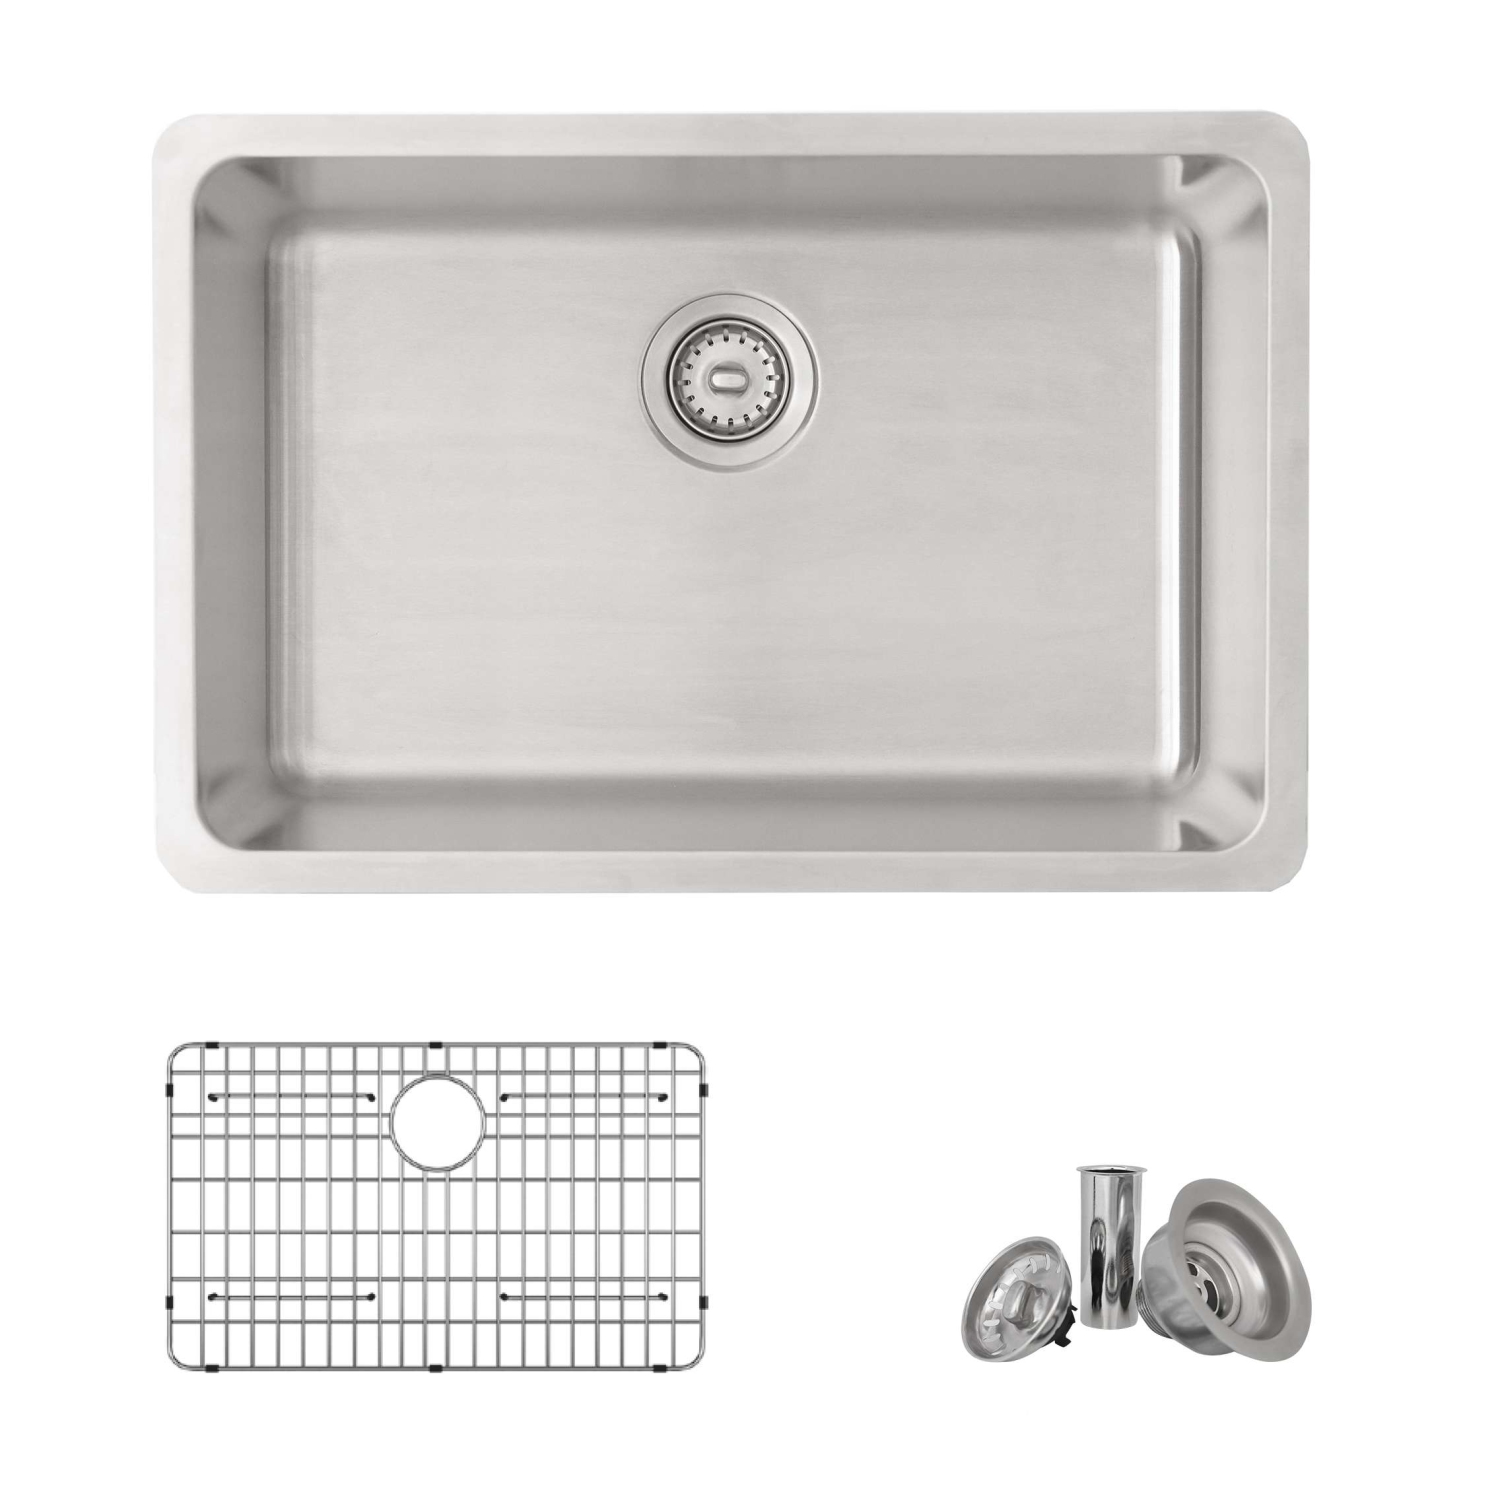 Stylish Dual-Mount 27" Stainless Steel Single Bowl Kitchen Sink with grid and strainer S-406TG